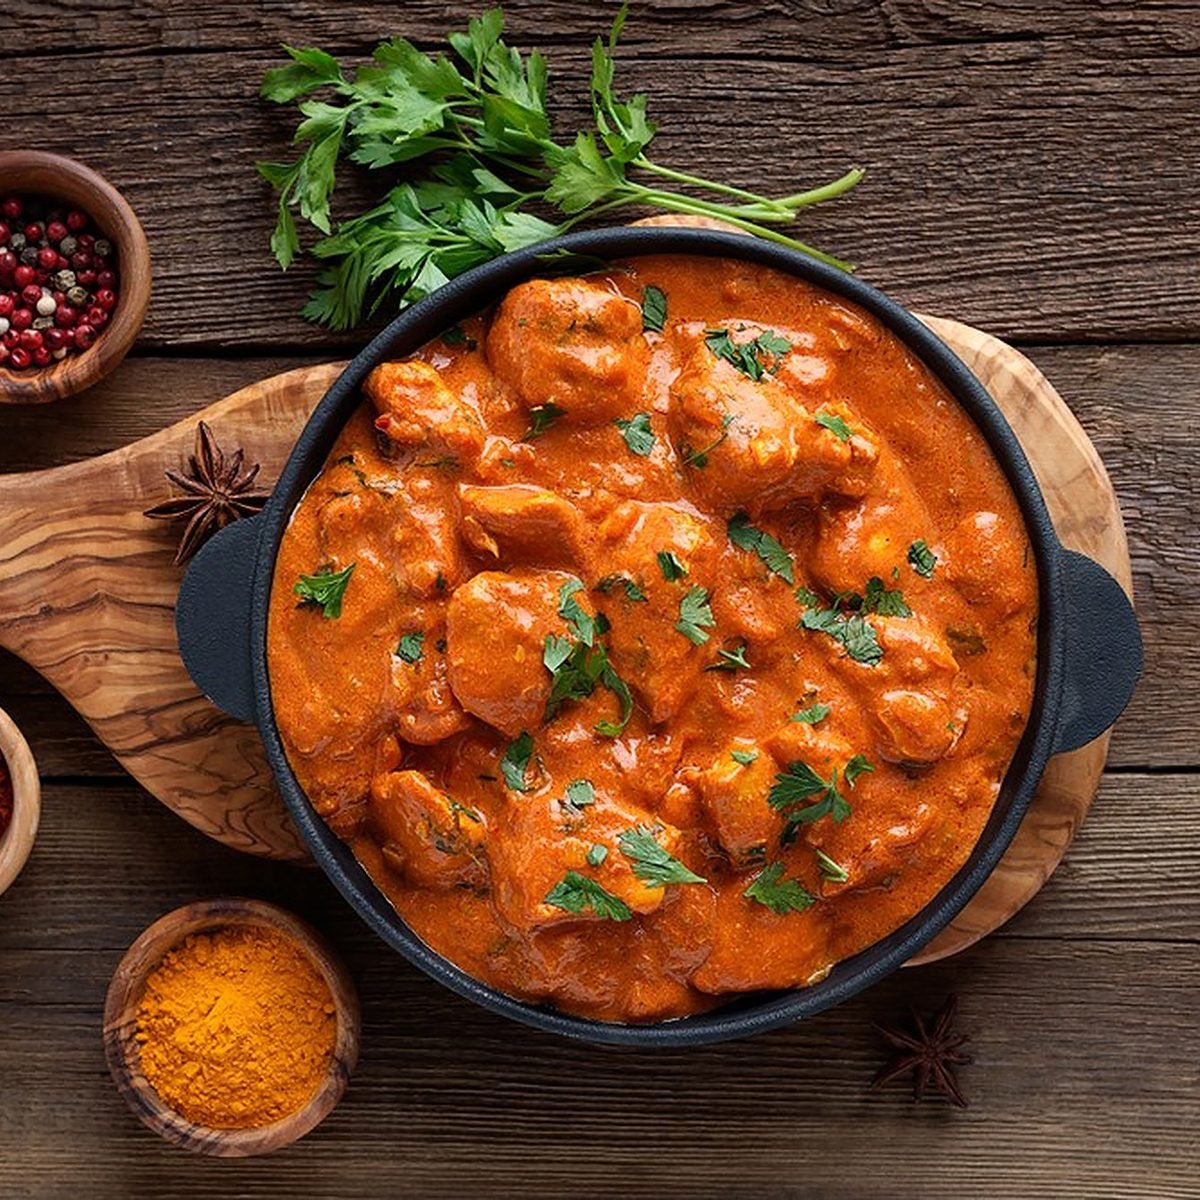 Tasty Butter Chicken Curry Dish From Indian Cuisine 1277362334 